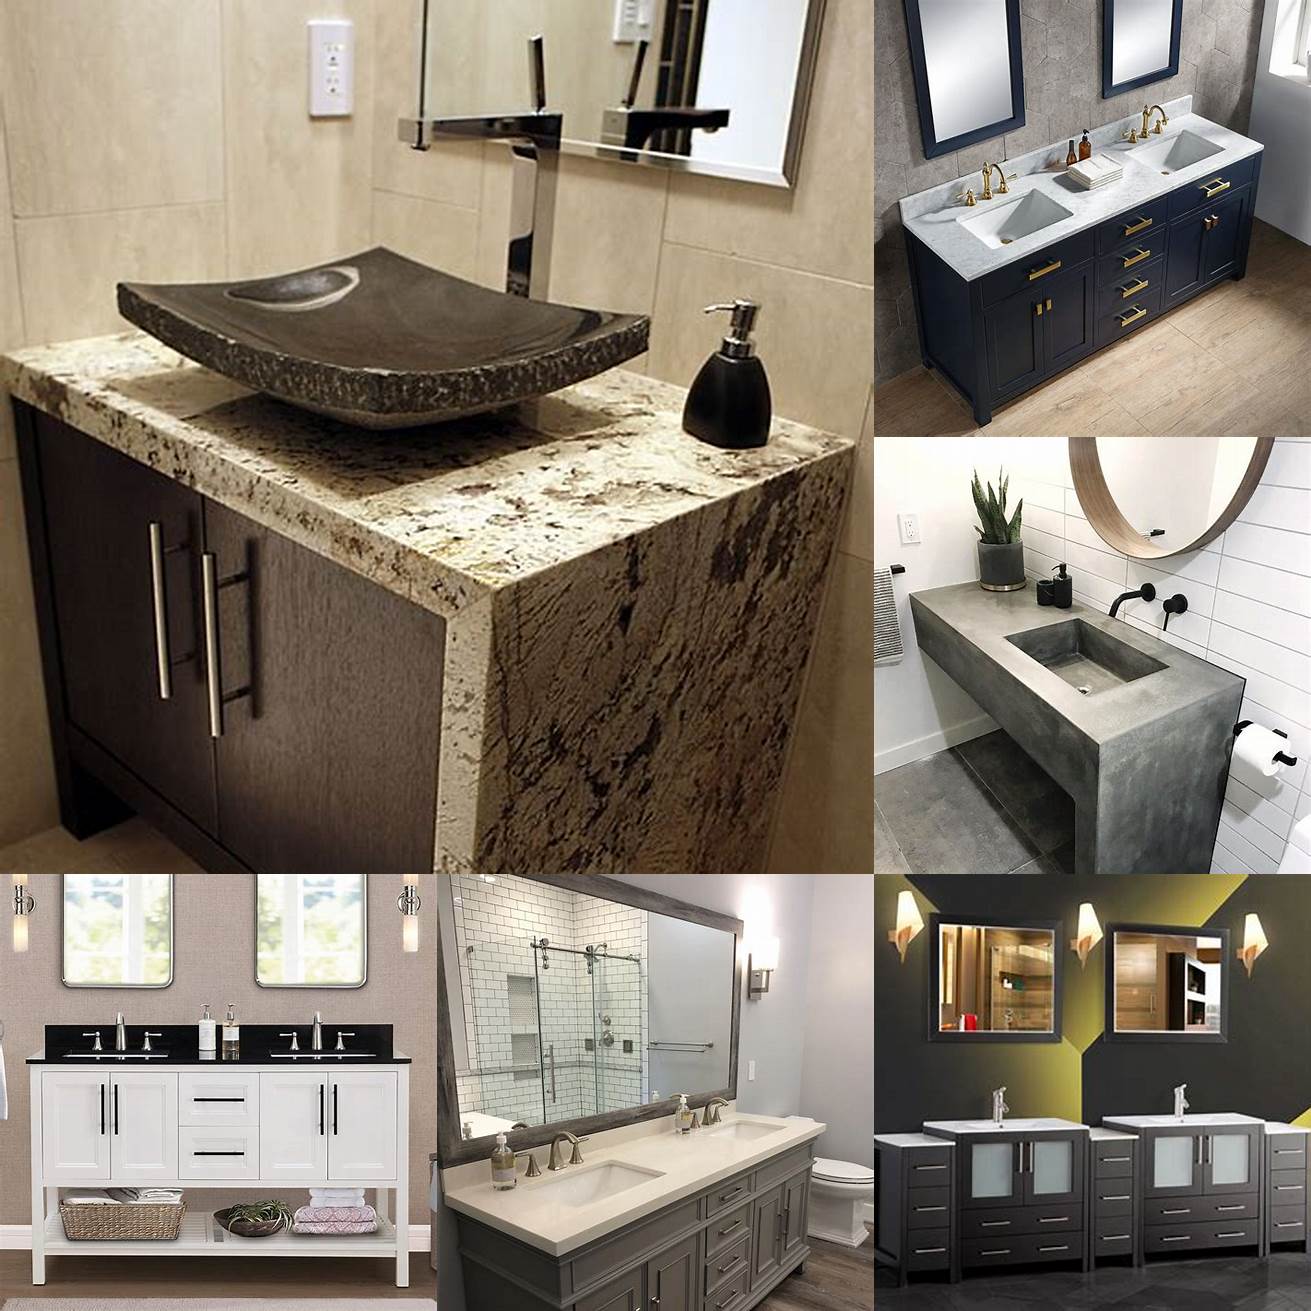 A double sink bathroom vanity top with a waterfall edge